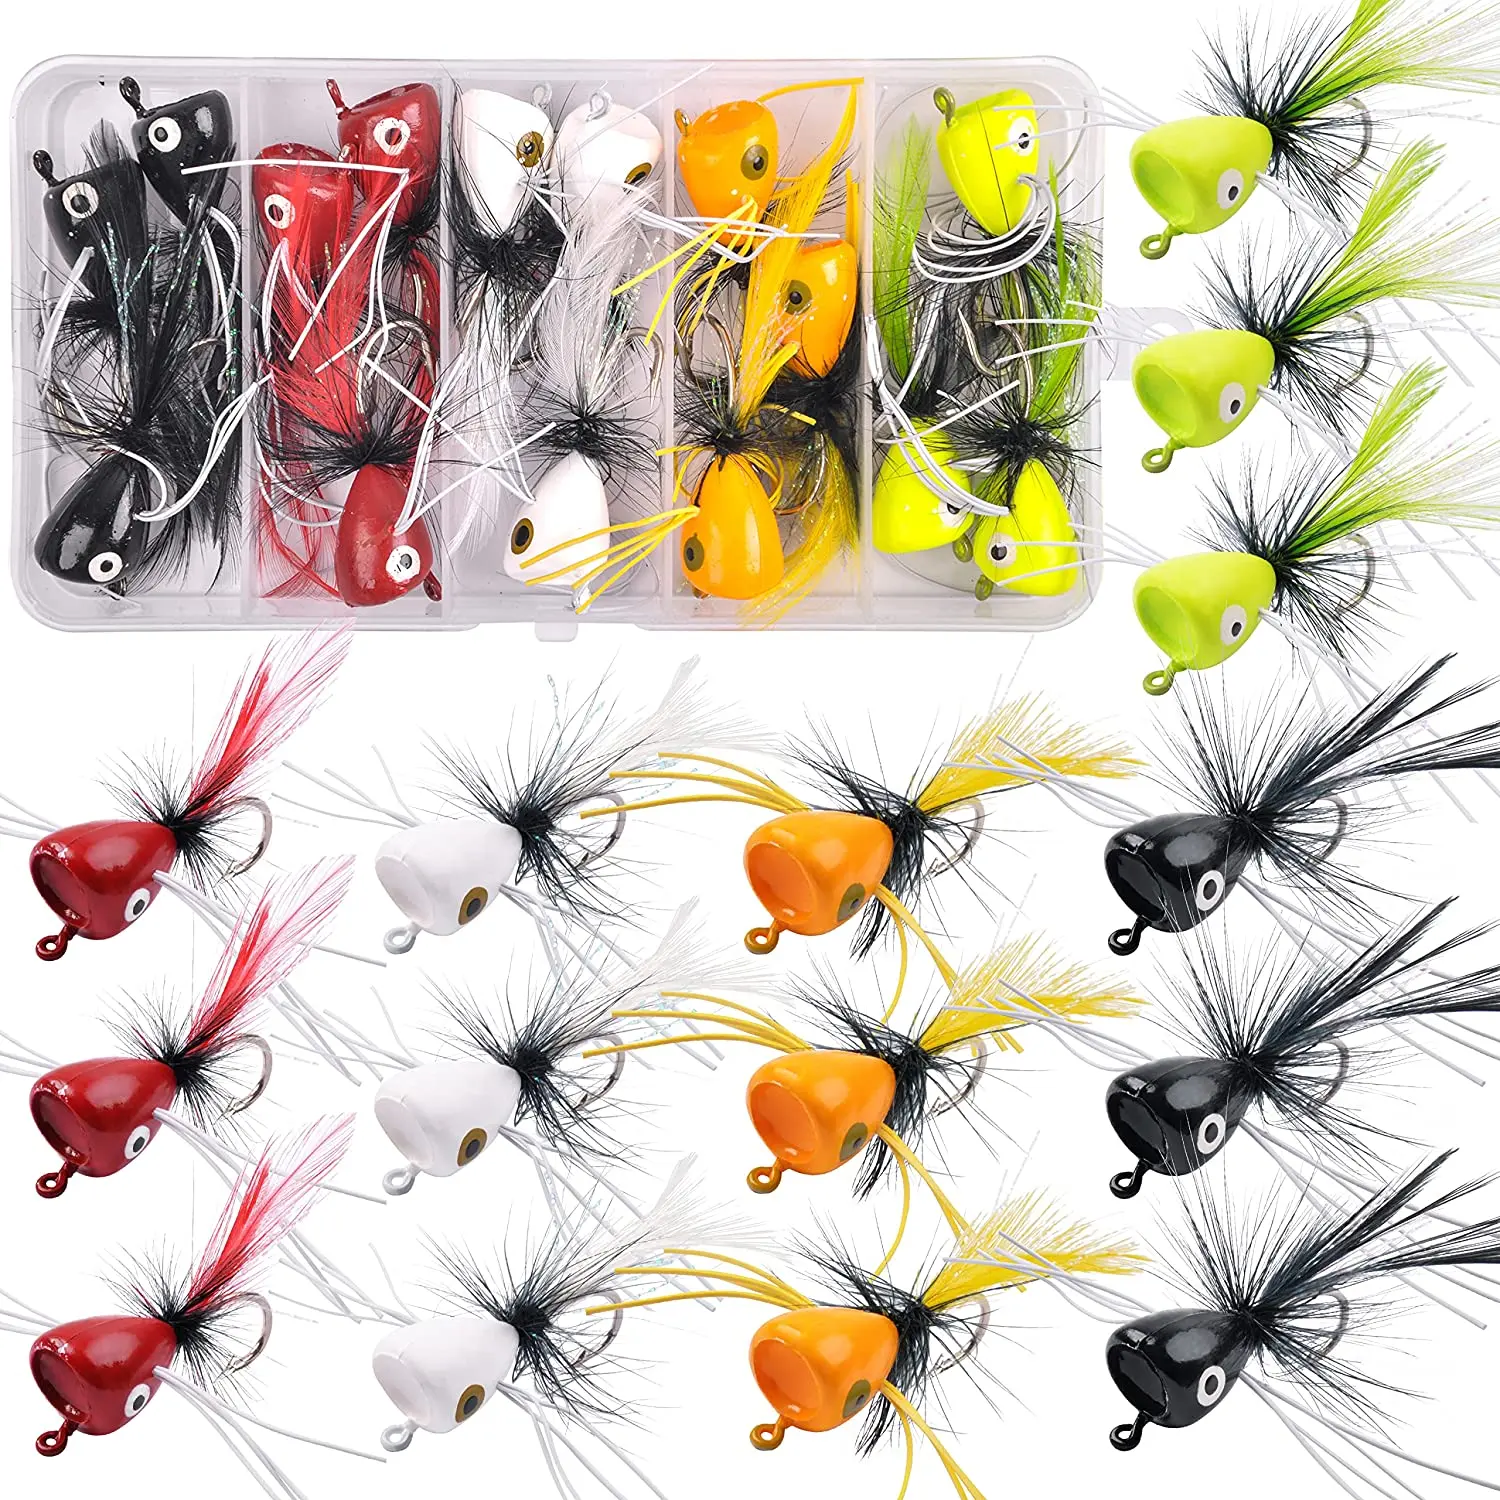 15PCS Bass Popper Flies Dry Fly Fishing Flies Topwater Panfish Bluegill Popper Bait Bug with Hooks for Freshwater